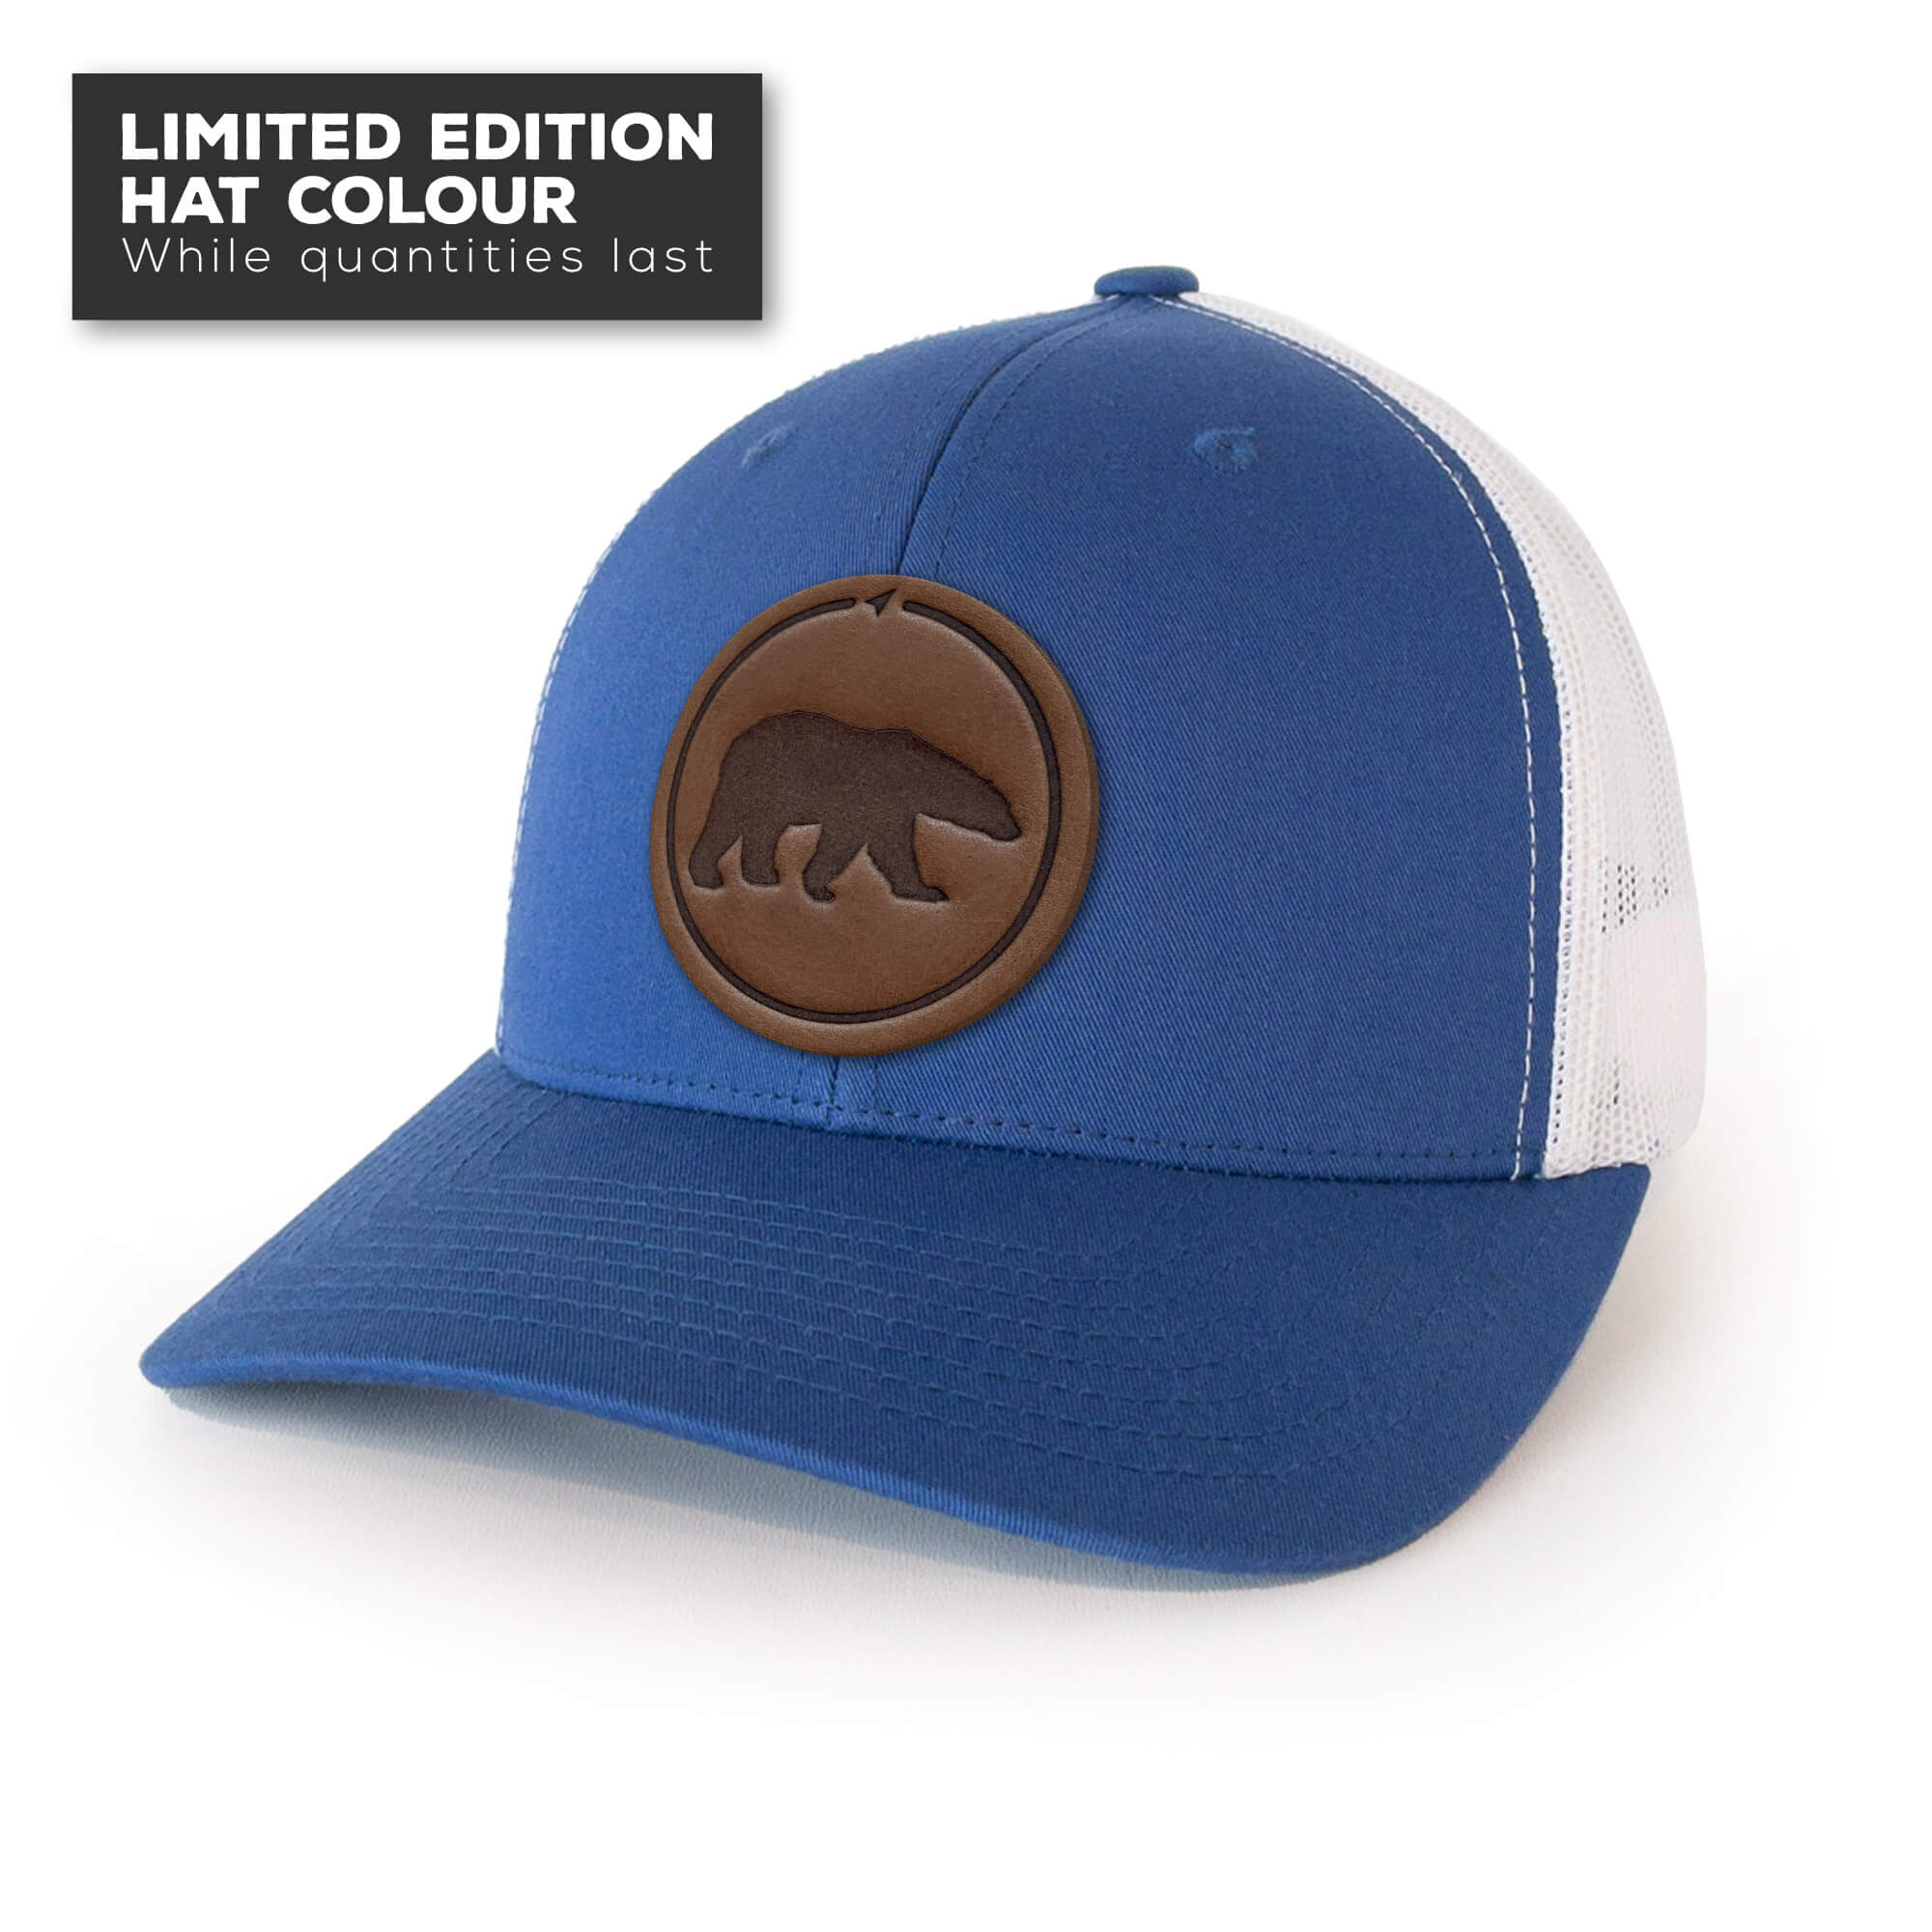 Royal Blue trucker hat with full-grain leather patch of Polar Bear